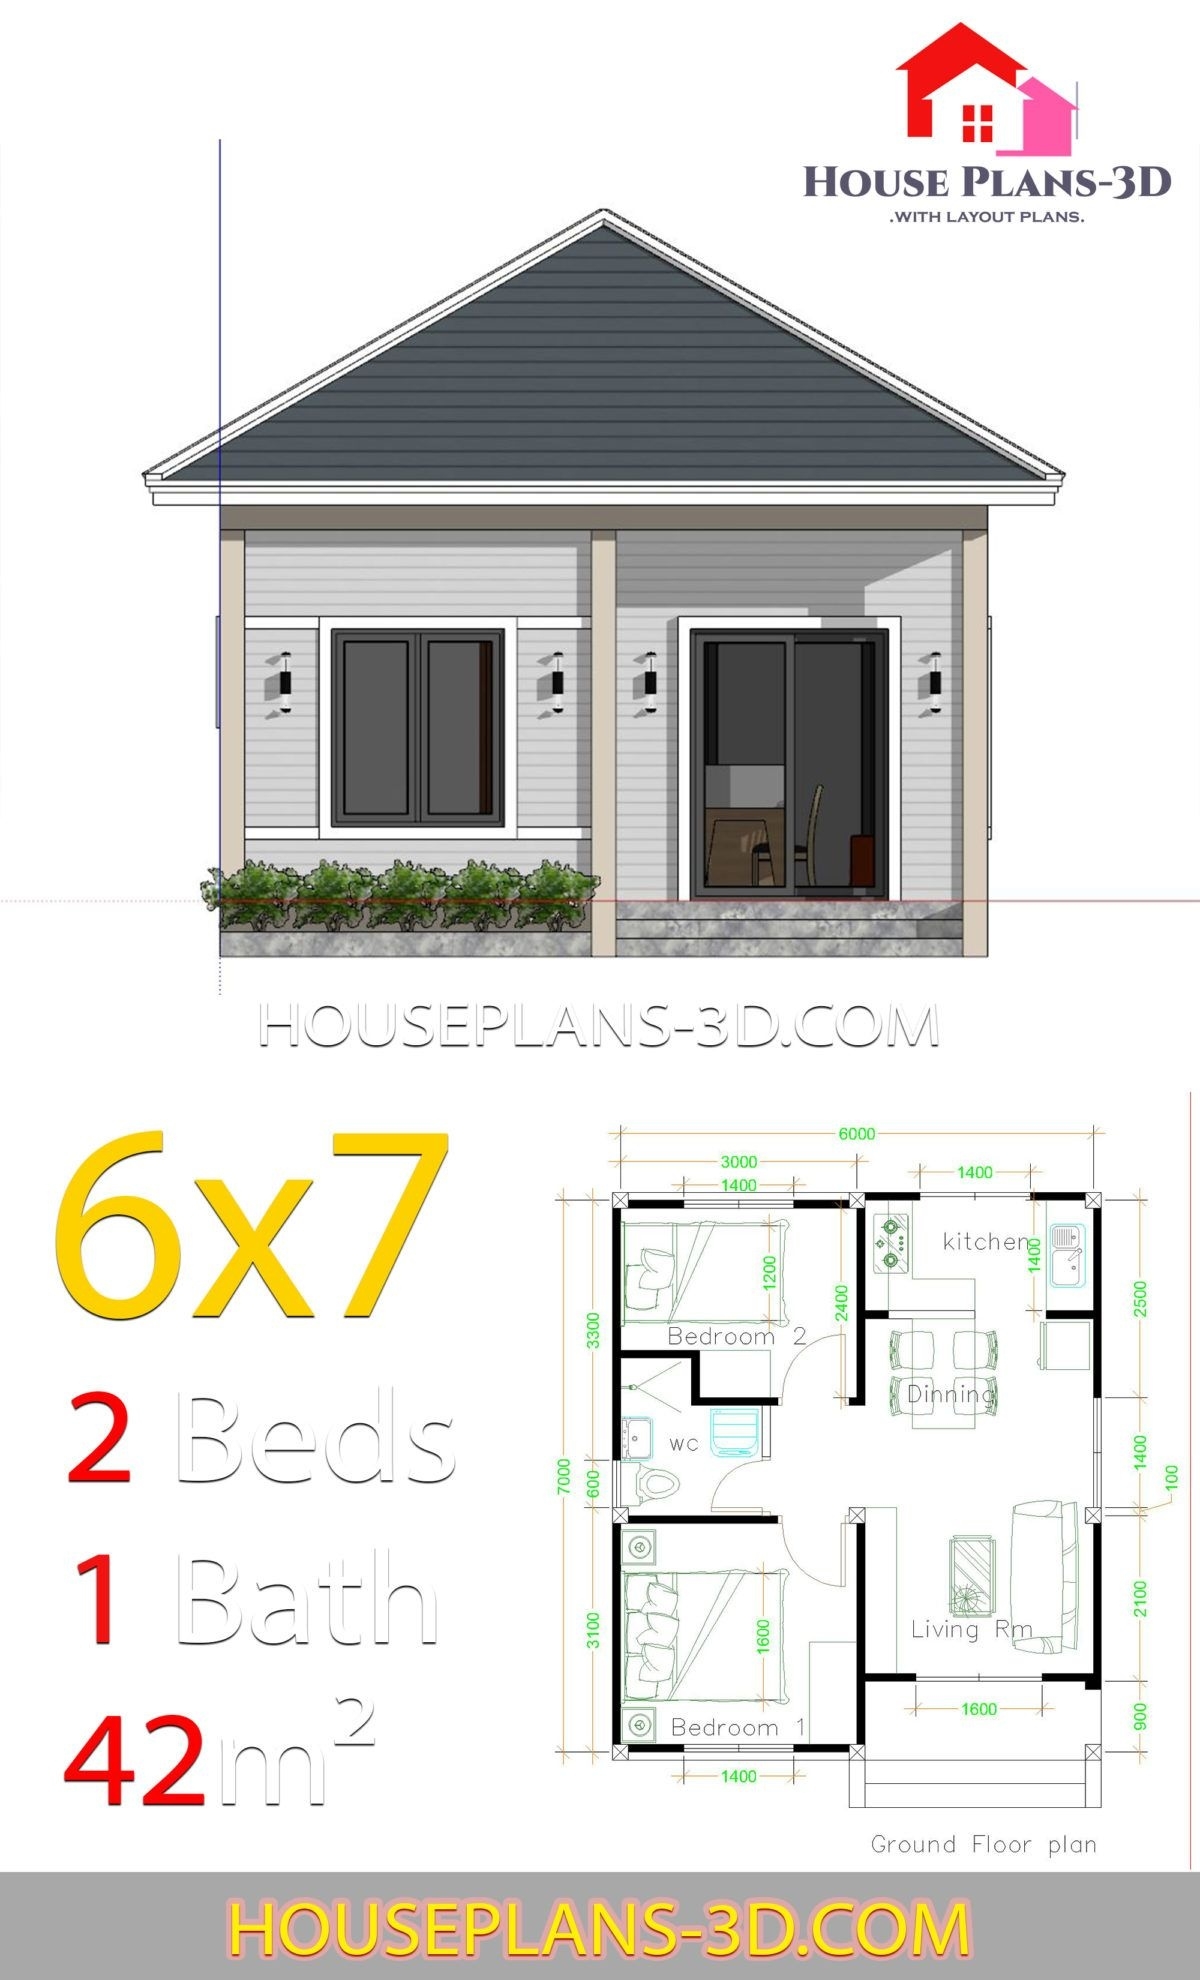 Splendid simple house plans 6x7 with 2 bedrooms hip roof house plans 3d for simple house plans